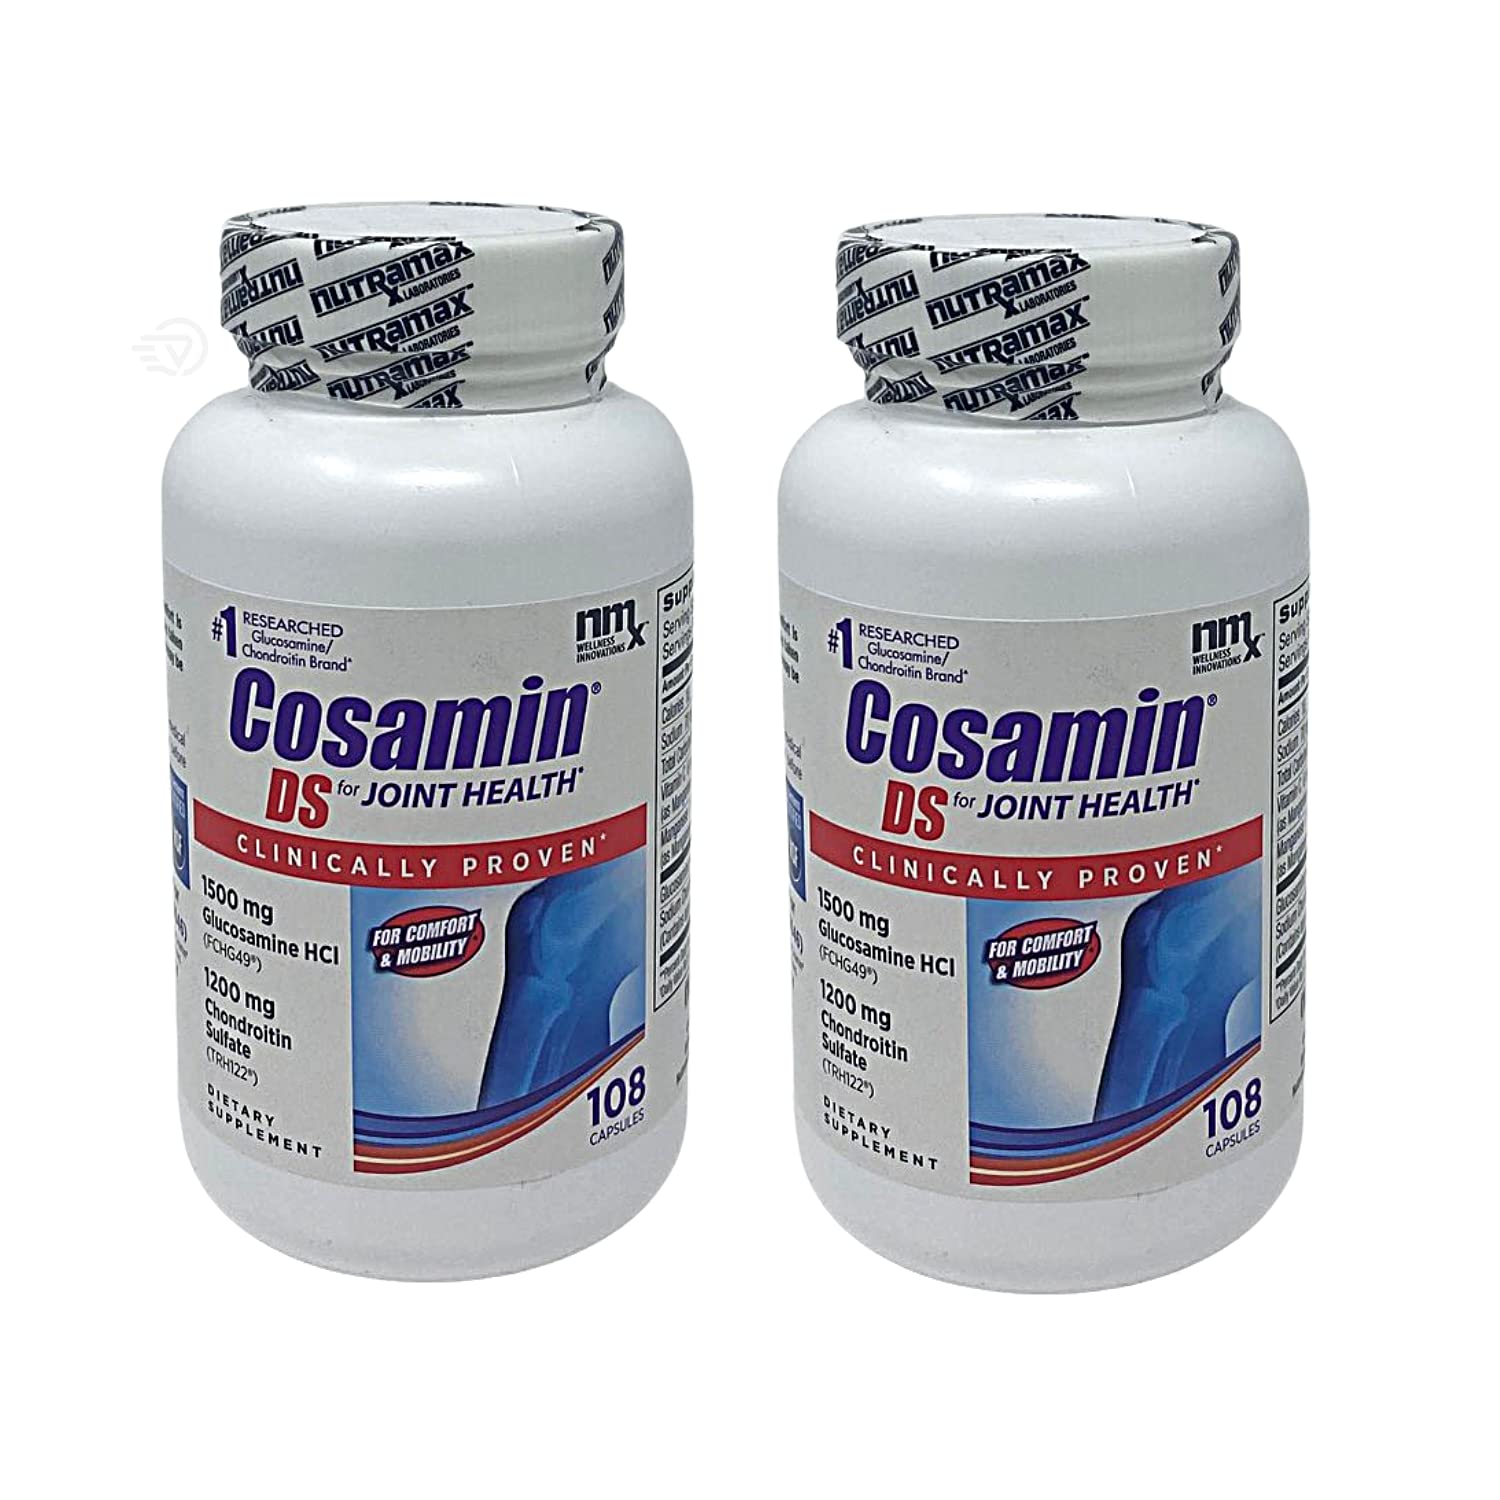 Cosamin DS for Joint Health Comfort & Mobility, 108 Capsules ( Pack of 2)